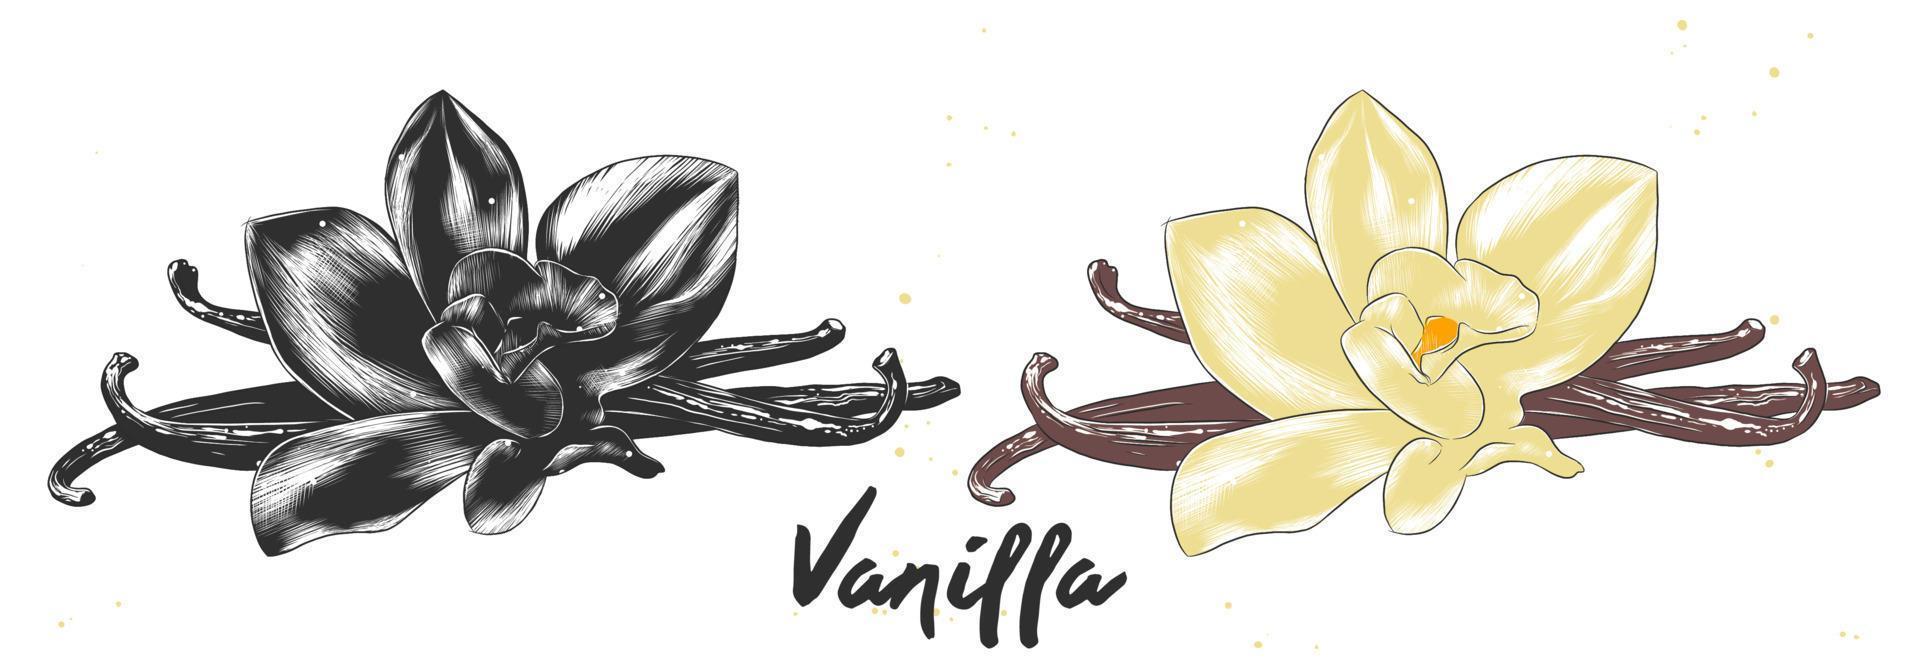 Vector engraved style illustration for posters, decoration and print. Hand drawn sketch of vanilla flower in monochrome and colorful. Detailed vegetarian food drawing.